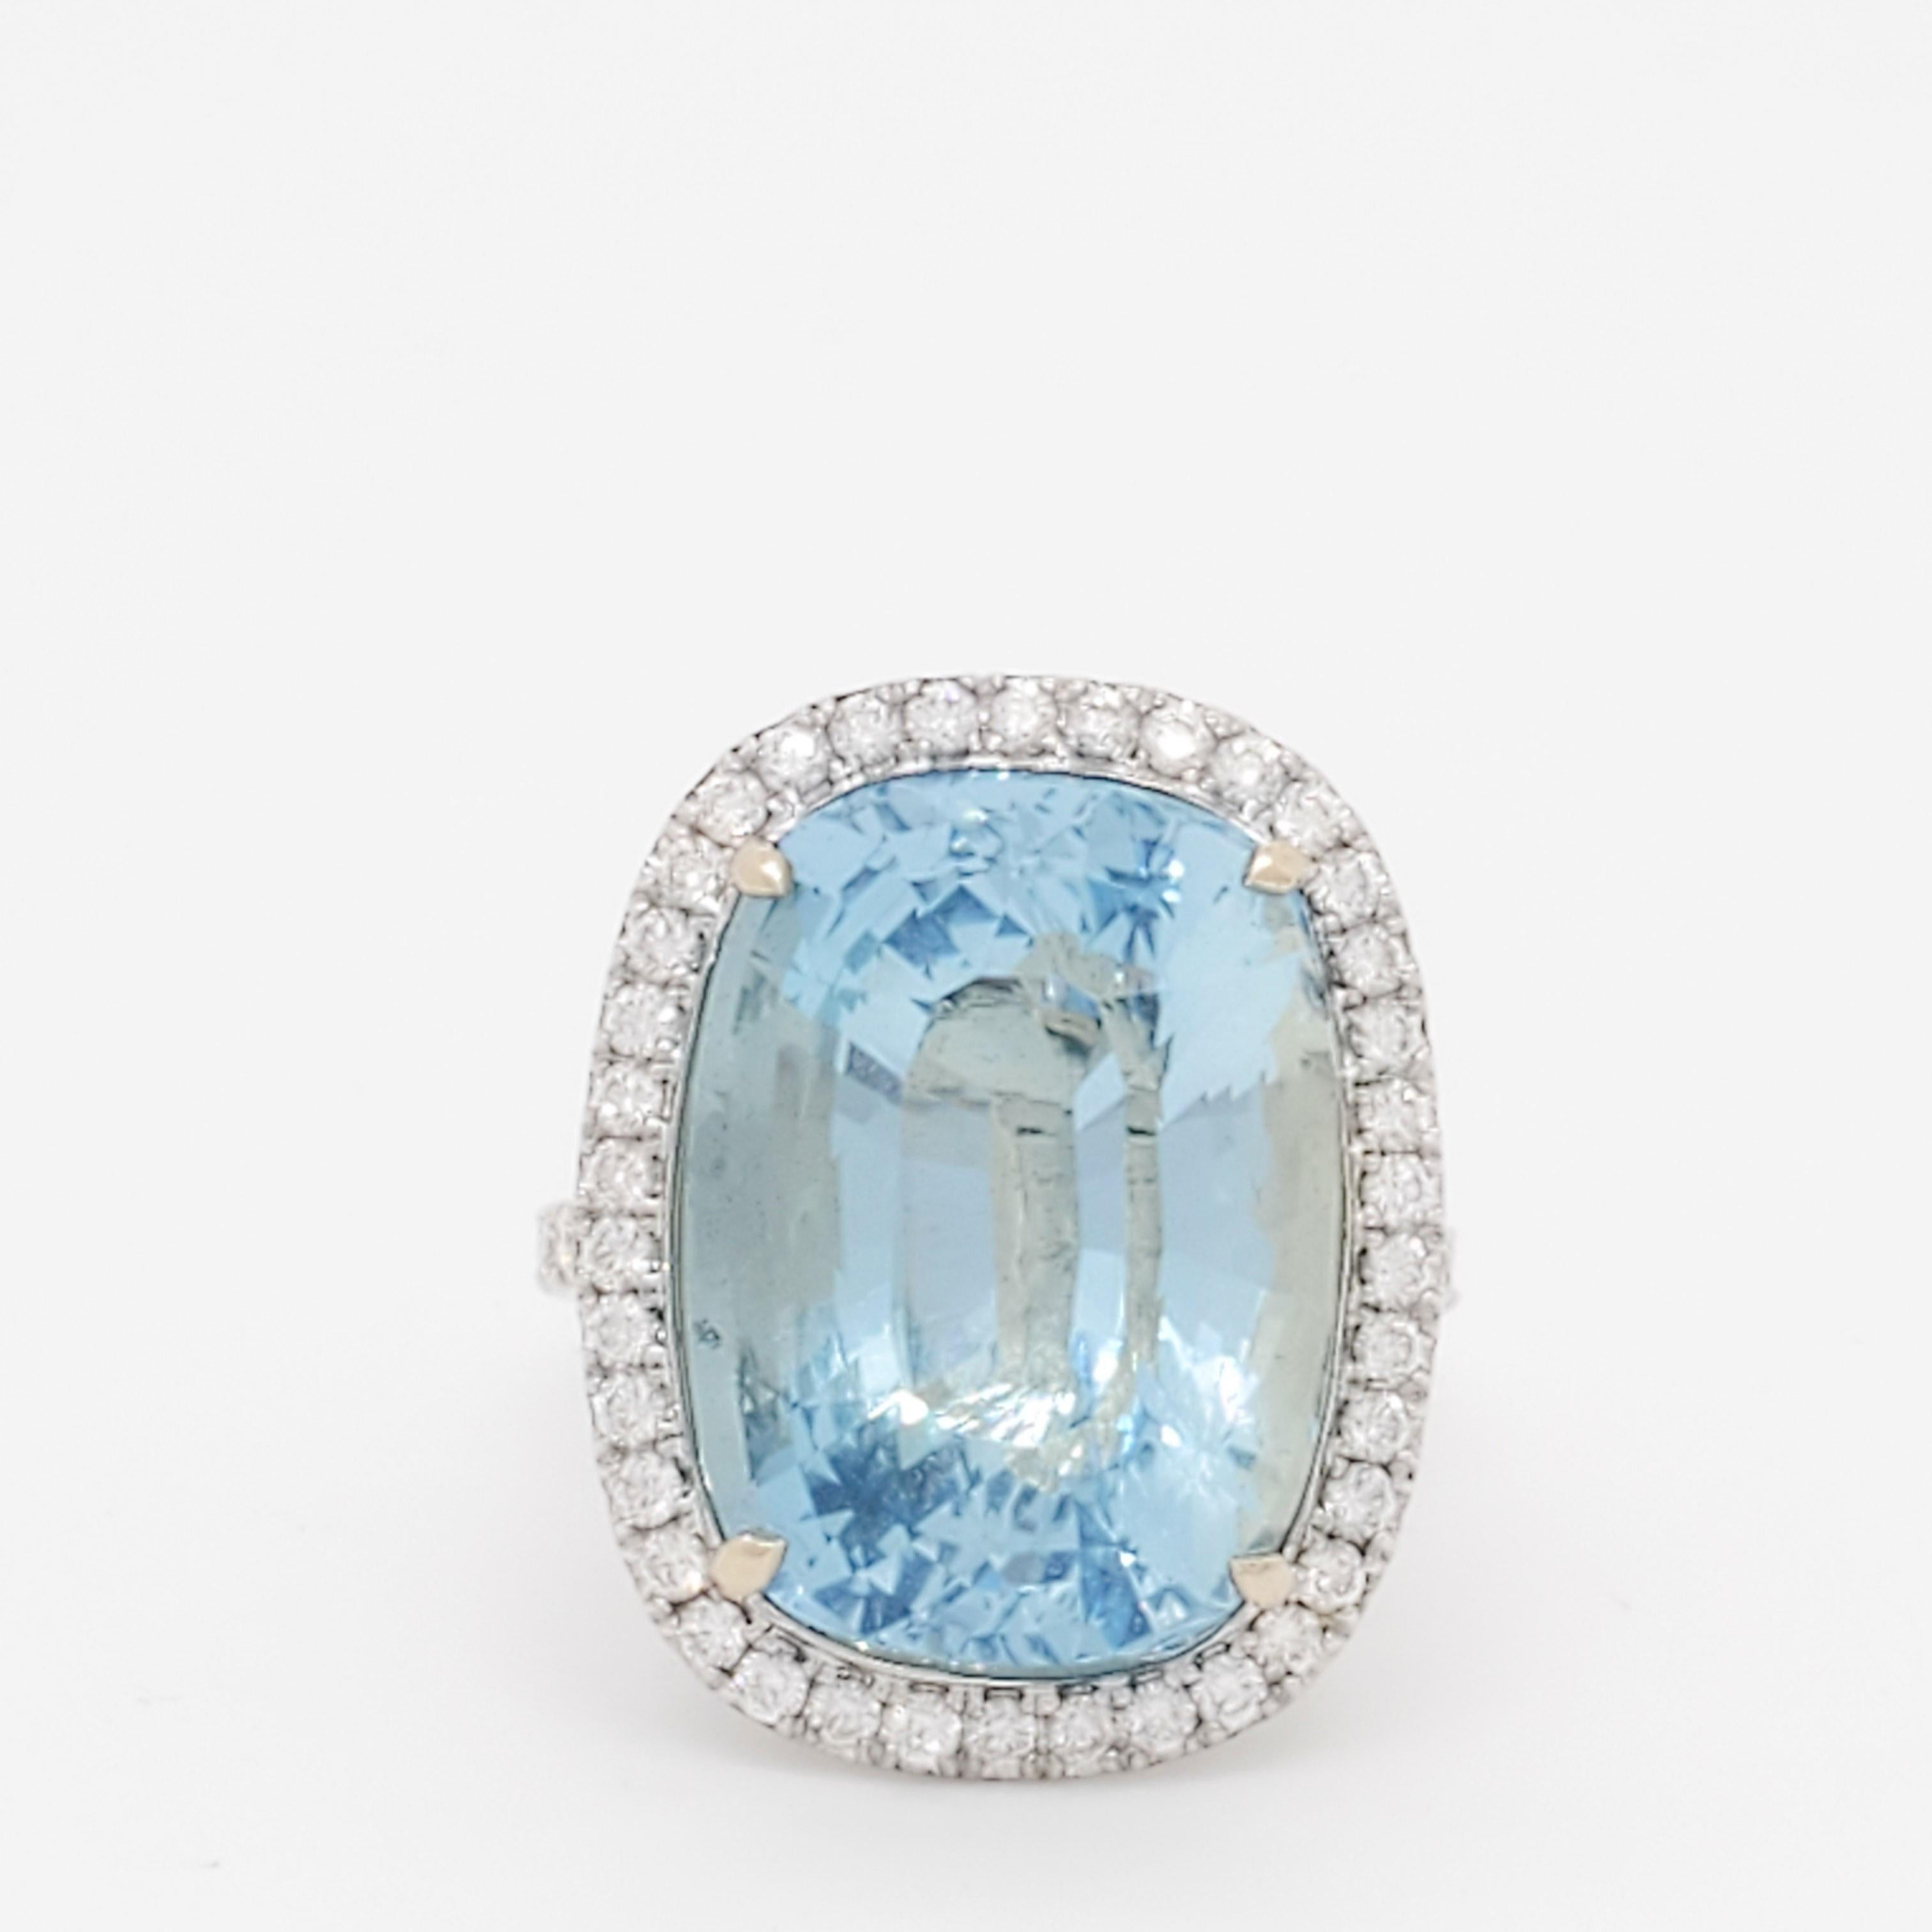 Gorgeous 14.10 ct. aquamarine cushion with 0.82 ct. good quality white diamond rounds.  Handmade in 18k white and yellow gold.  Ring size 6.5.